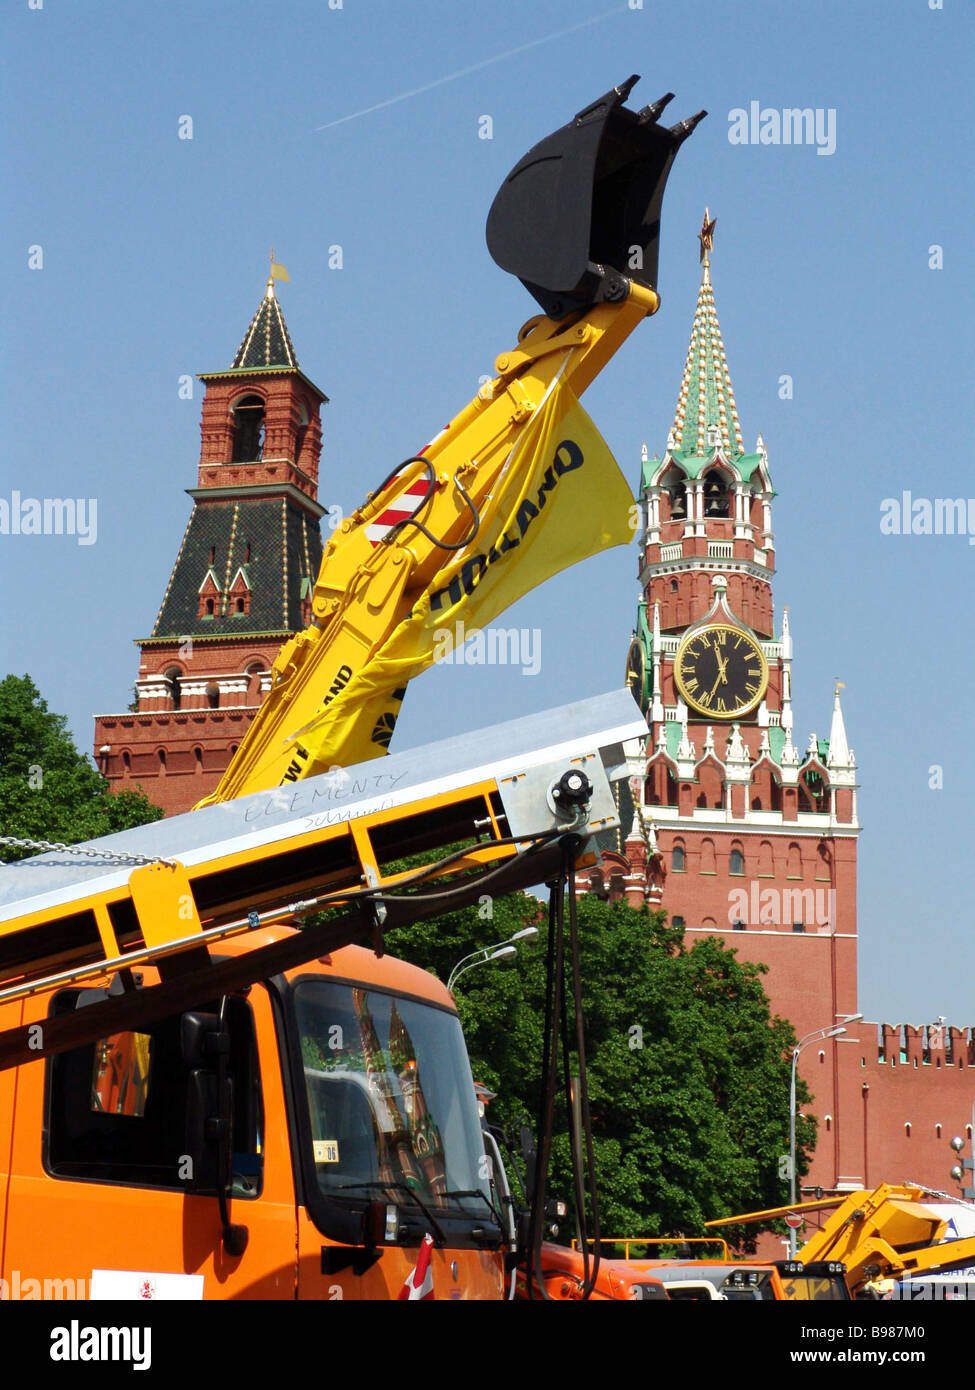 At the Dorkomexpo 2005 exhibition of road builders and utility companies running on Vasilyevsky Slope. Stock Photo